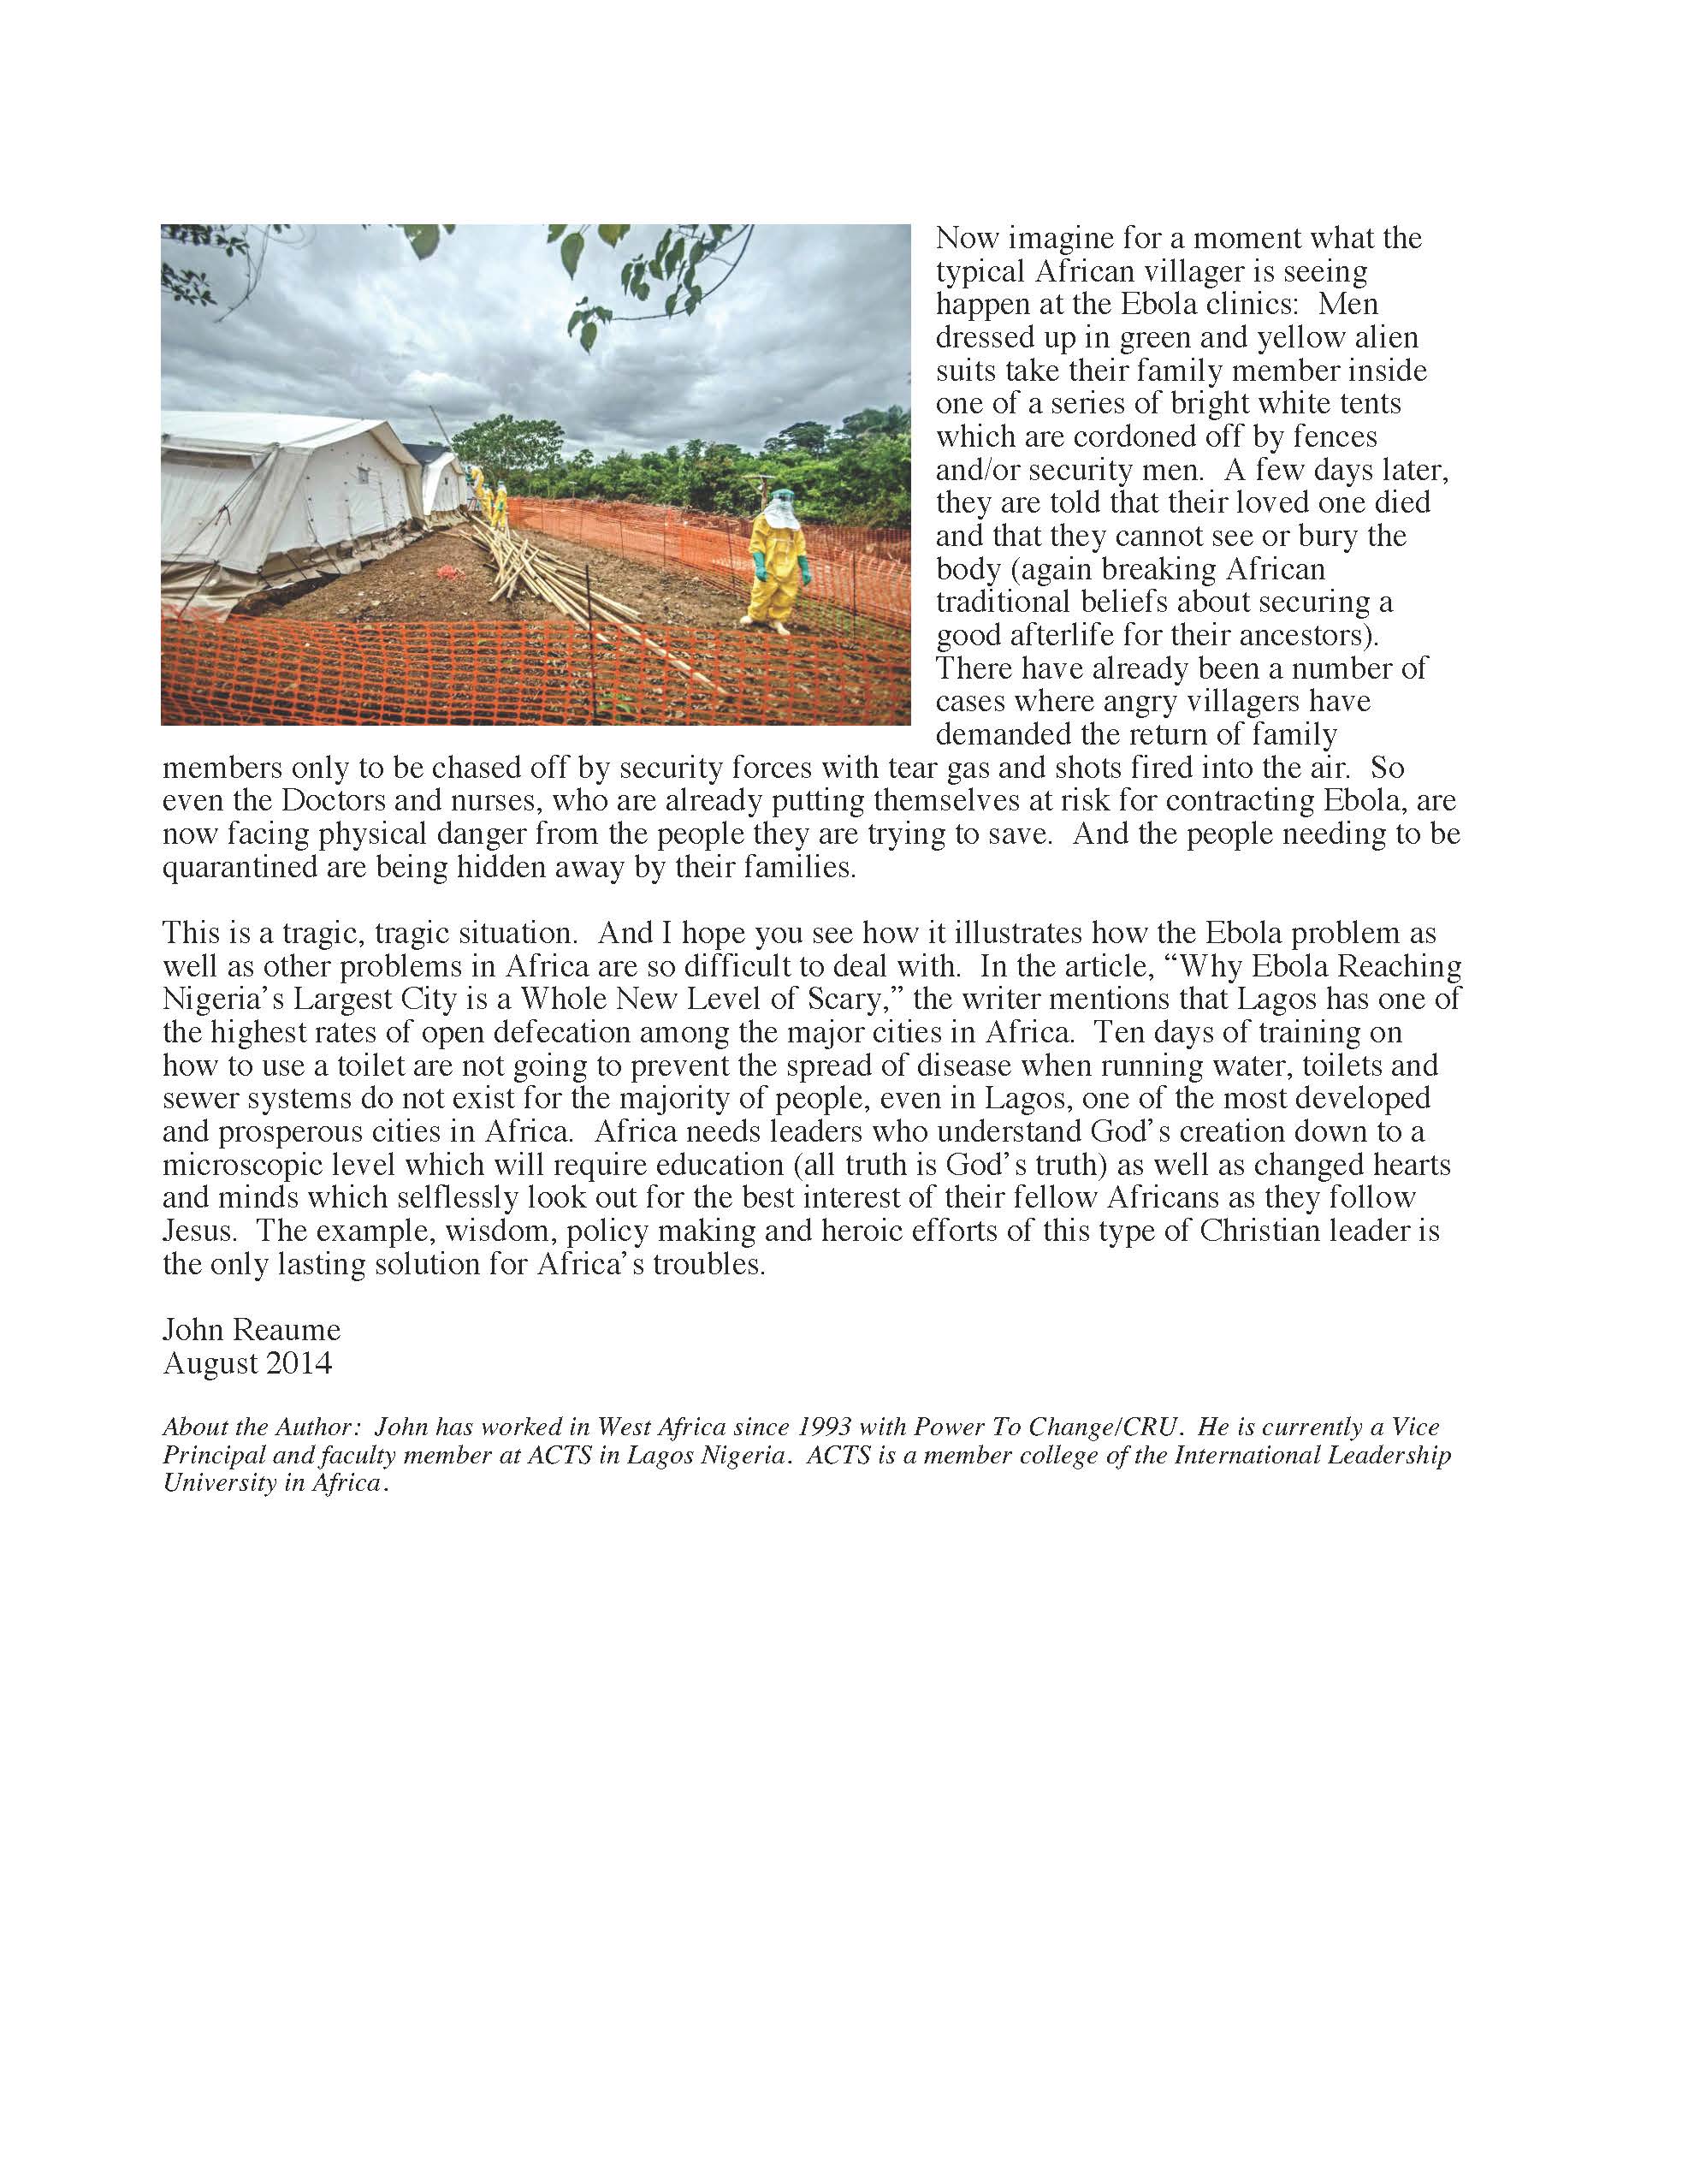 Worldview and Ebola Page 2